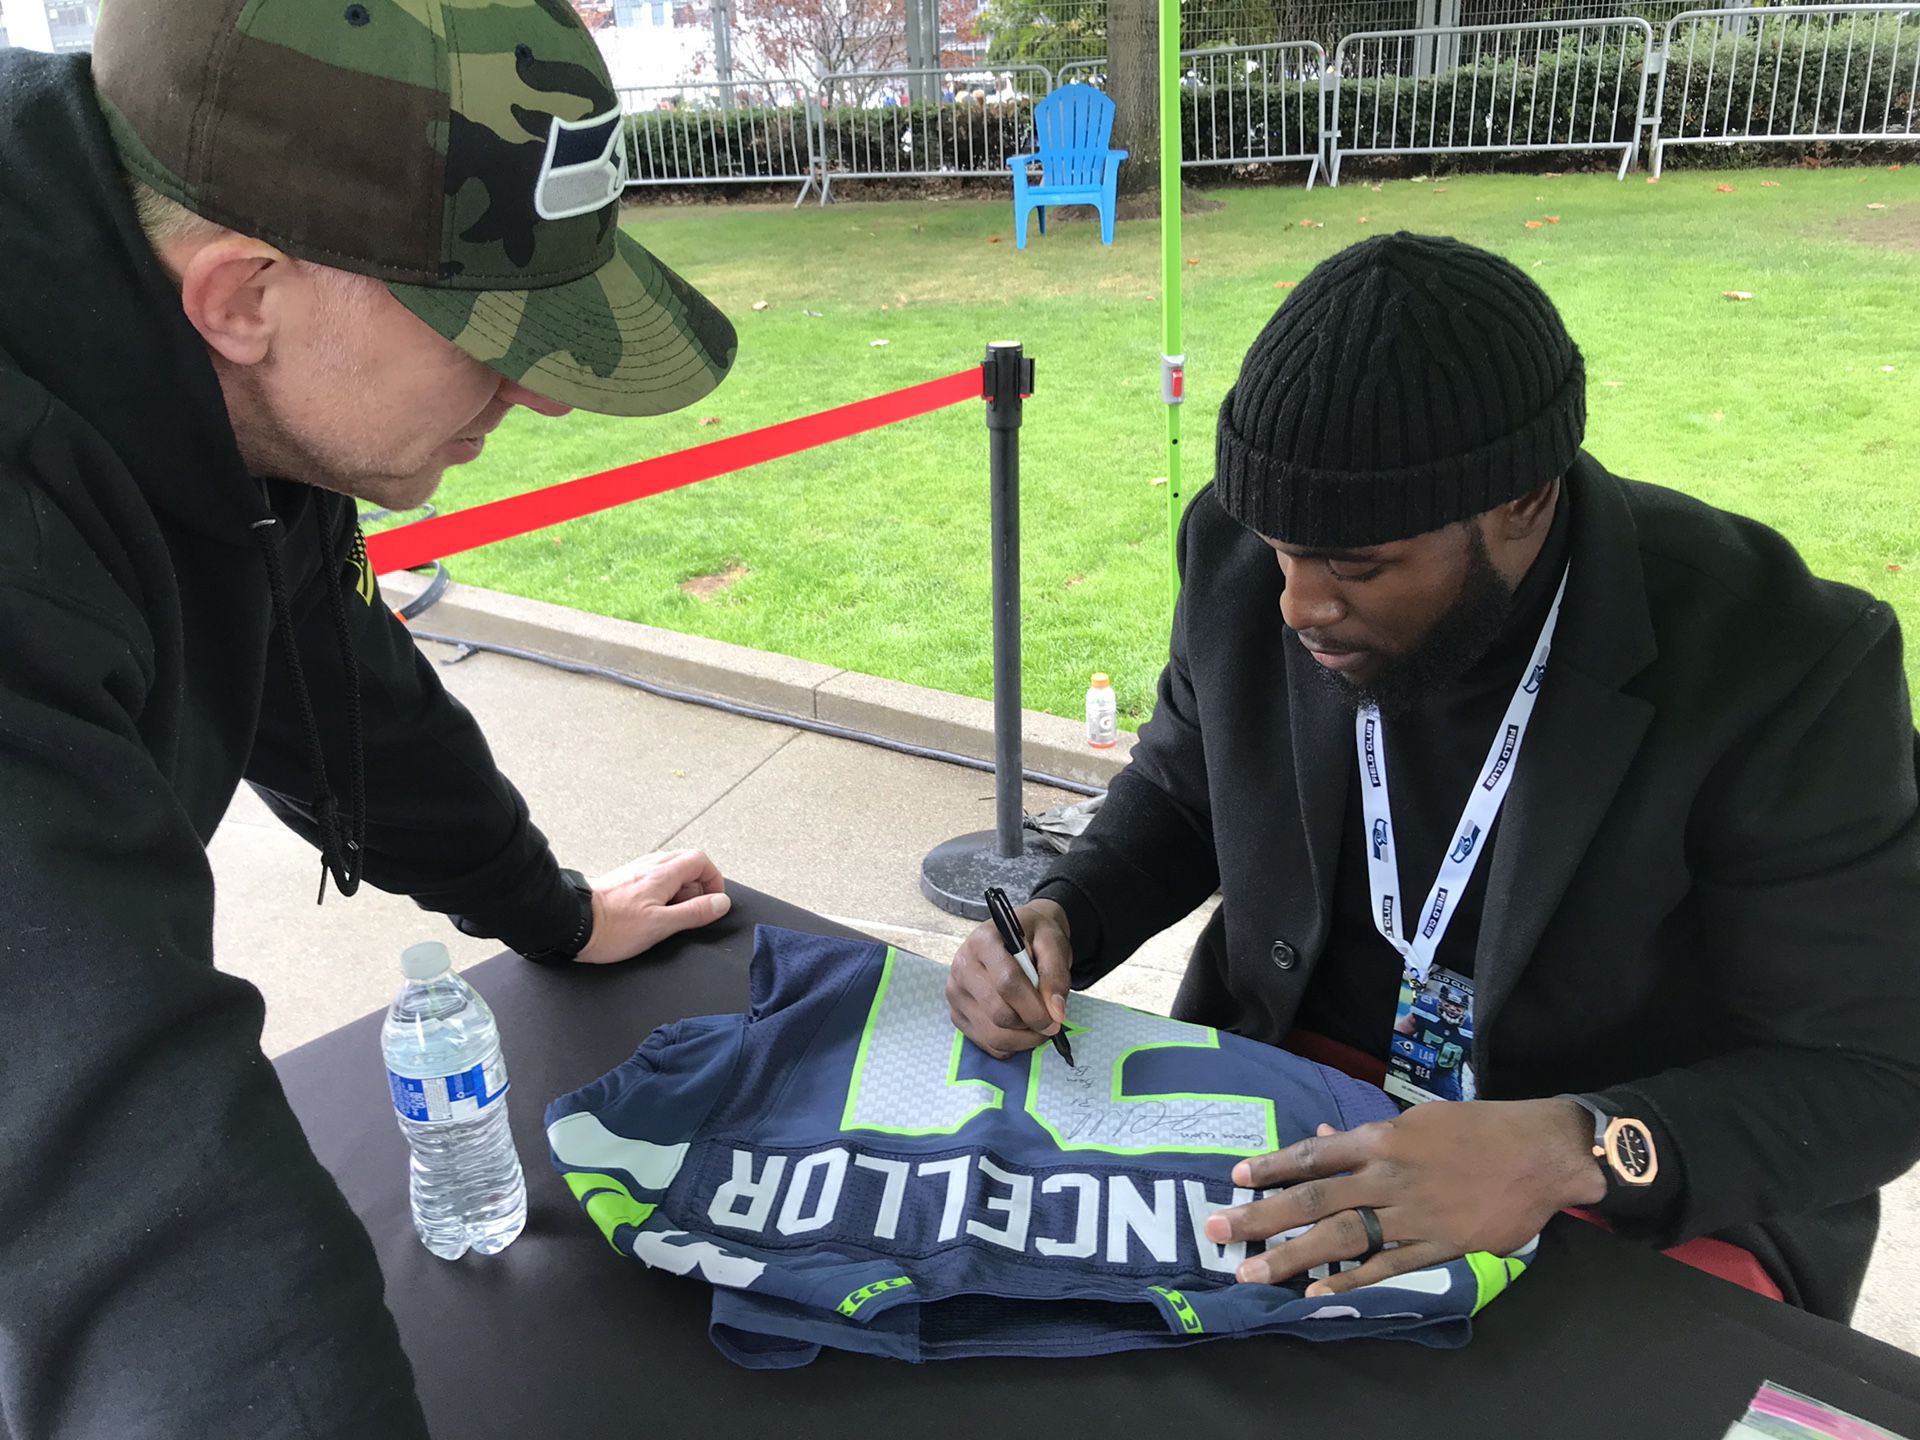 Kam Chancellor Seahawks Color Rush Jersey for Sale in Edgewood, WA - OfferUp